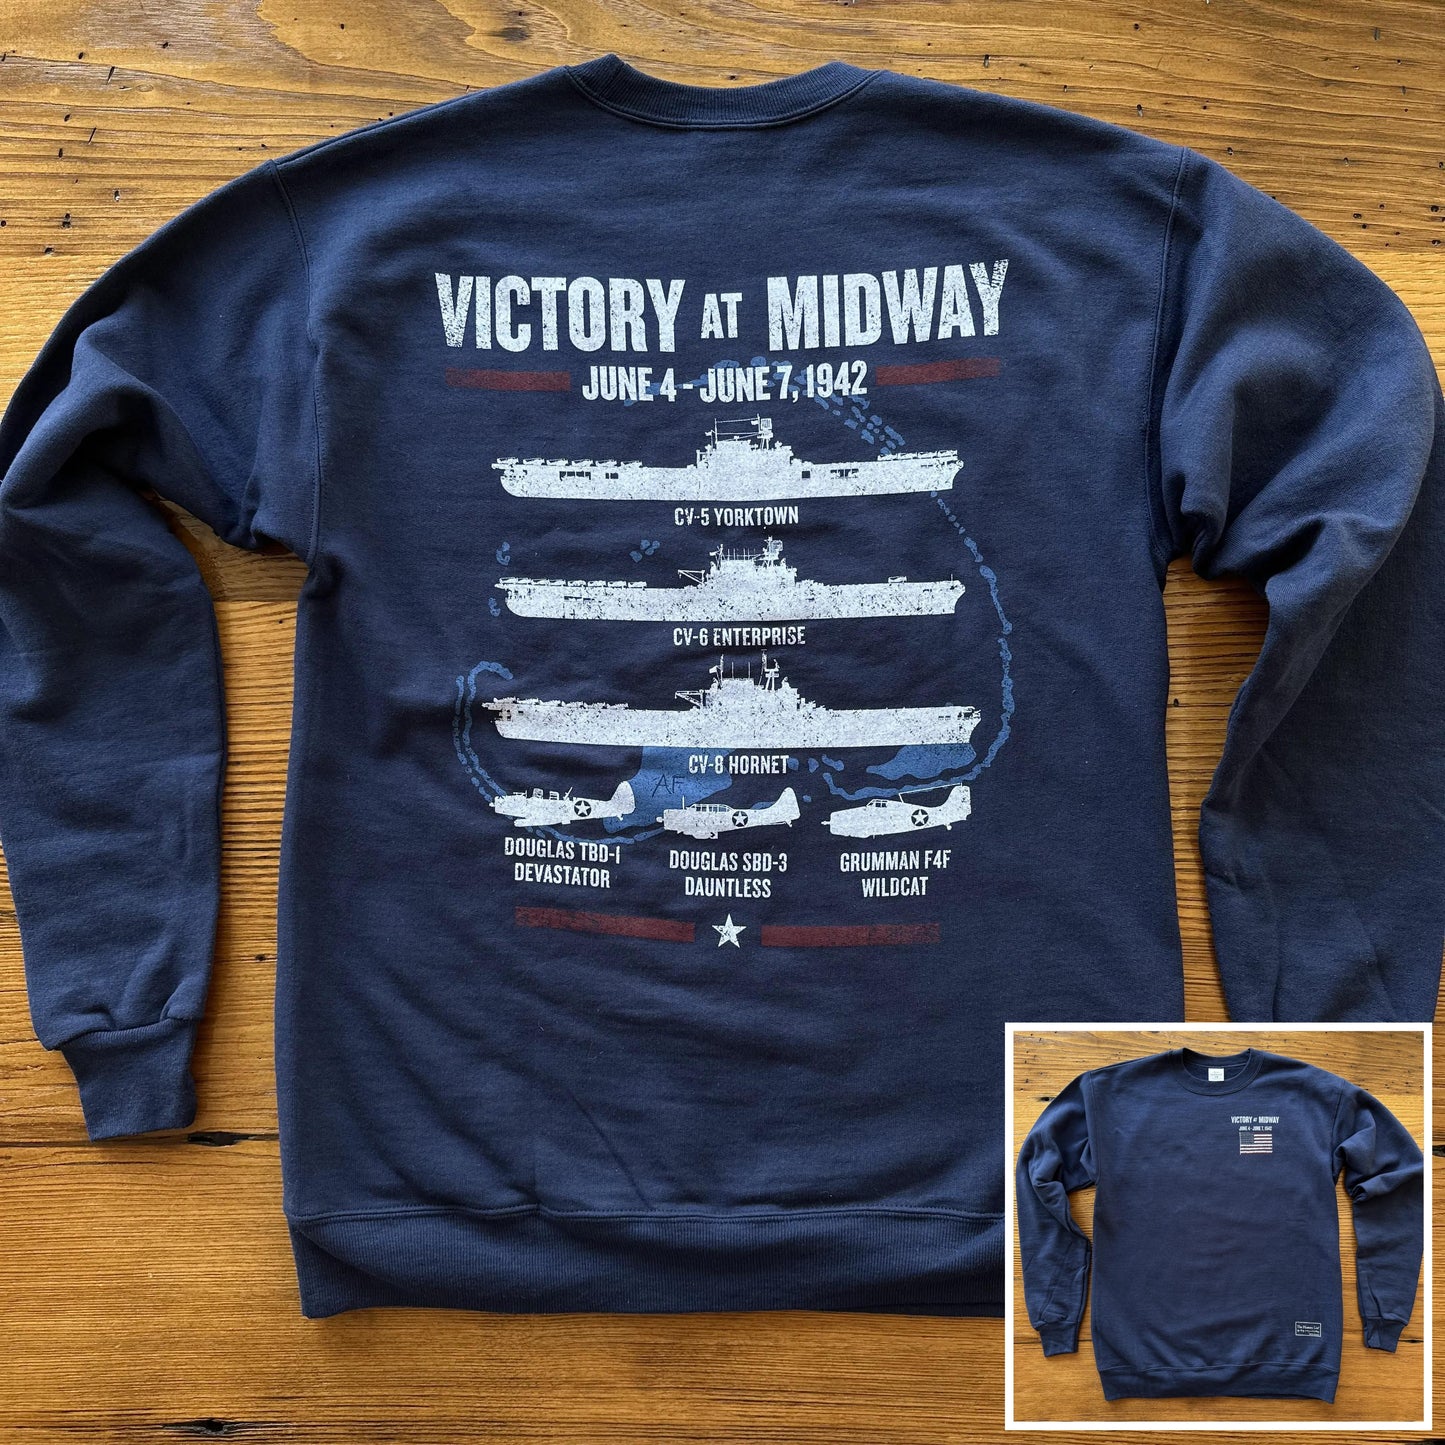 "Victory at Midway" Crewneck sweatshirt from The History List store